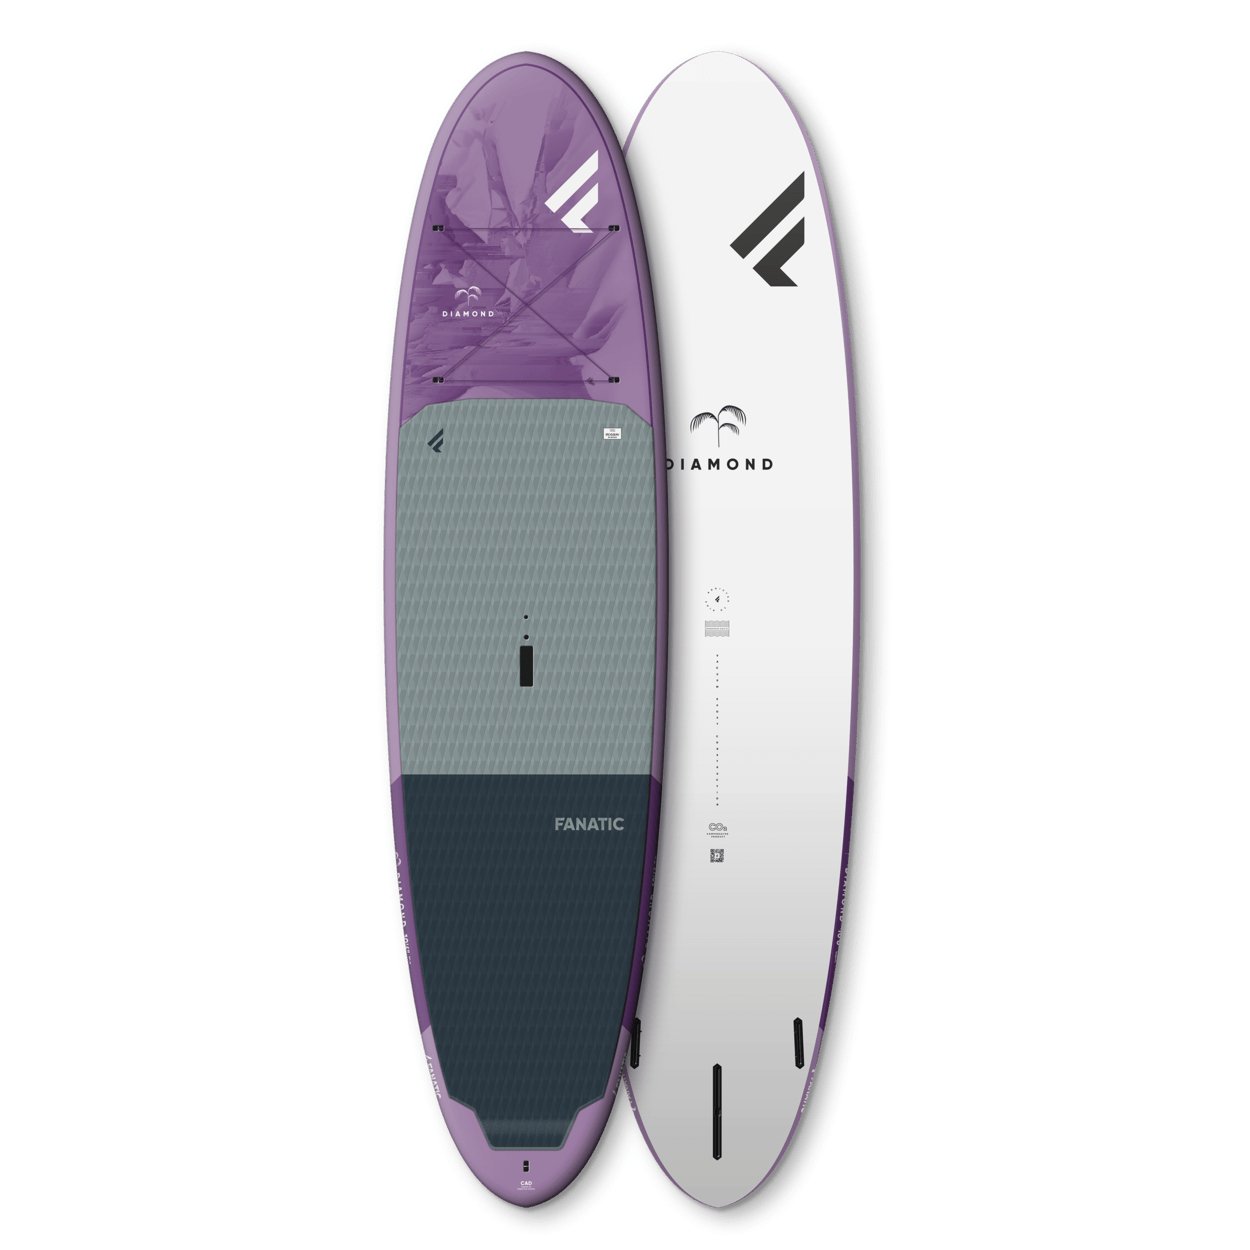 Fanatic Diamond 2023 - Worthing Watersports - 9010583133836 - SUP Composite - Fanatic SUP